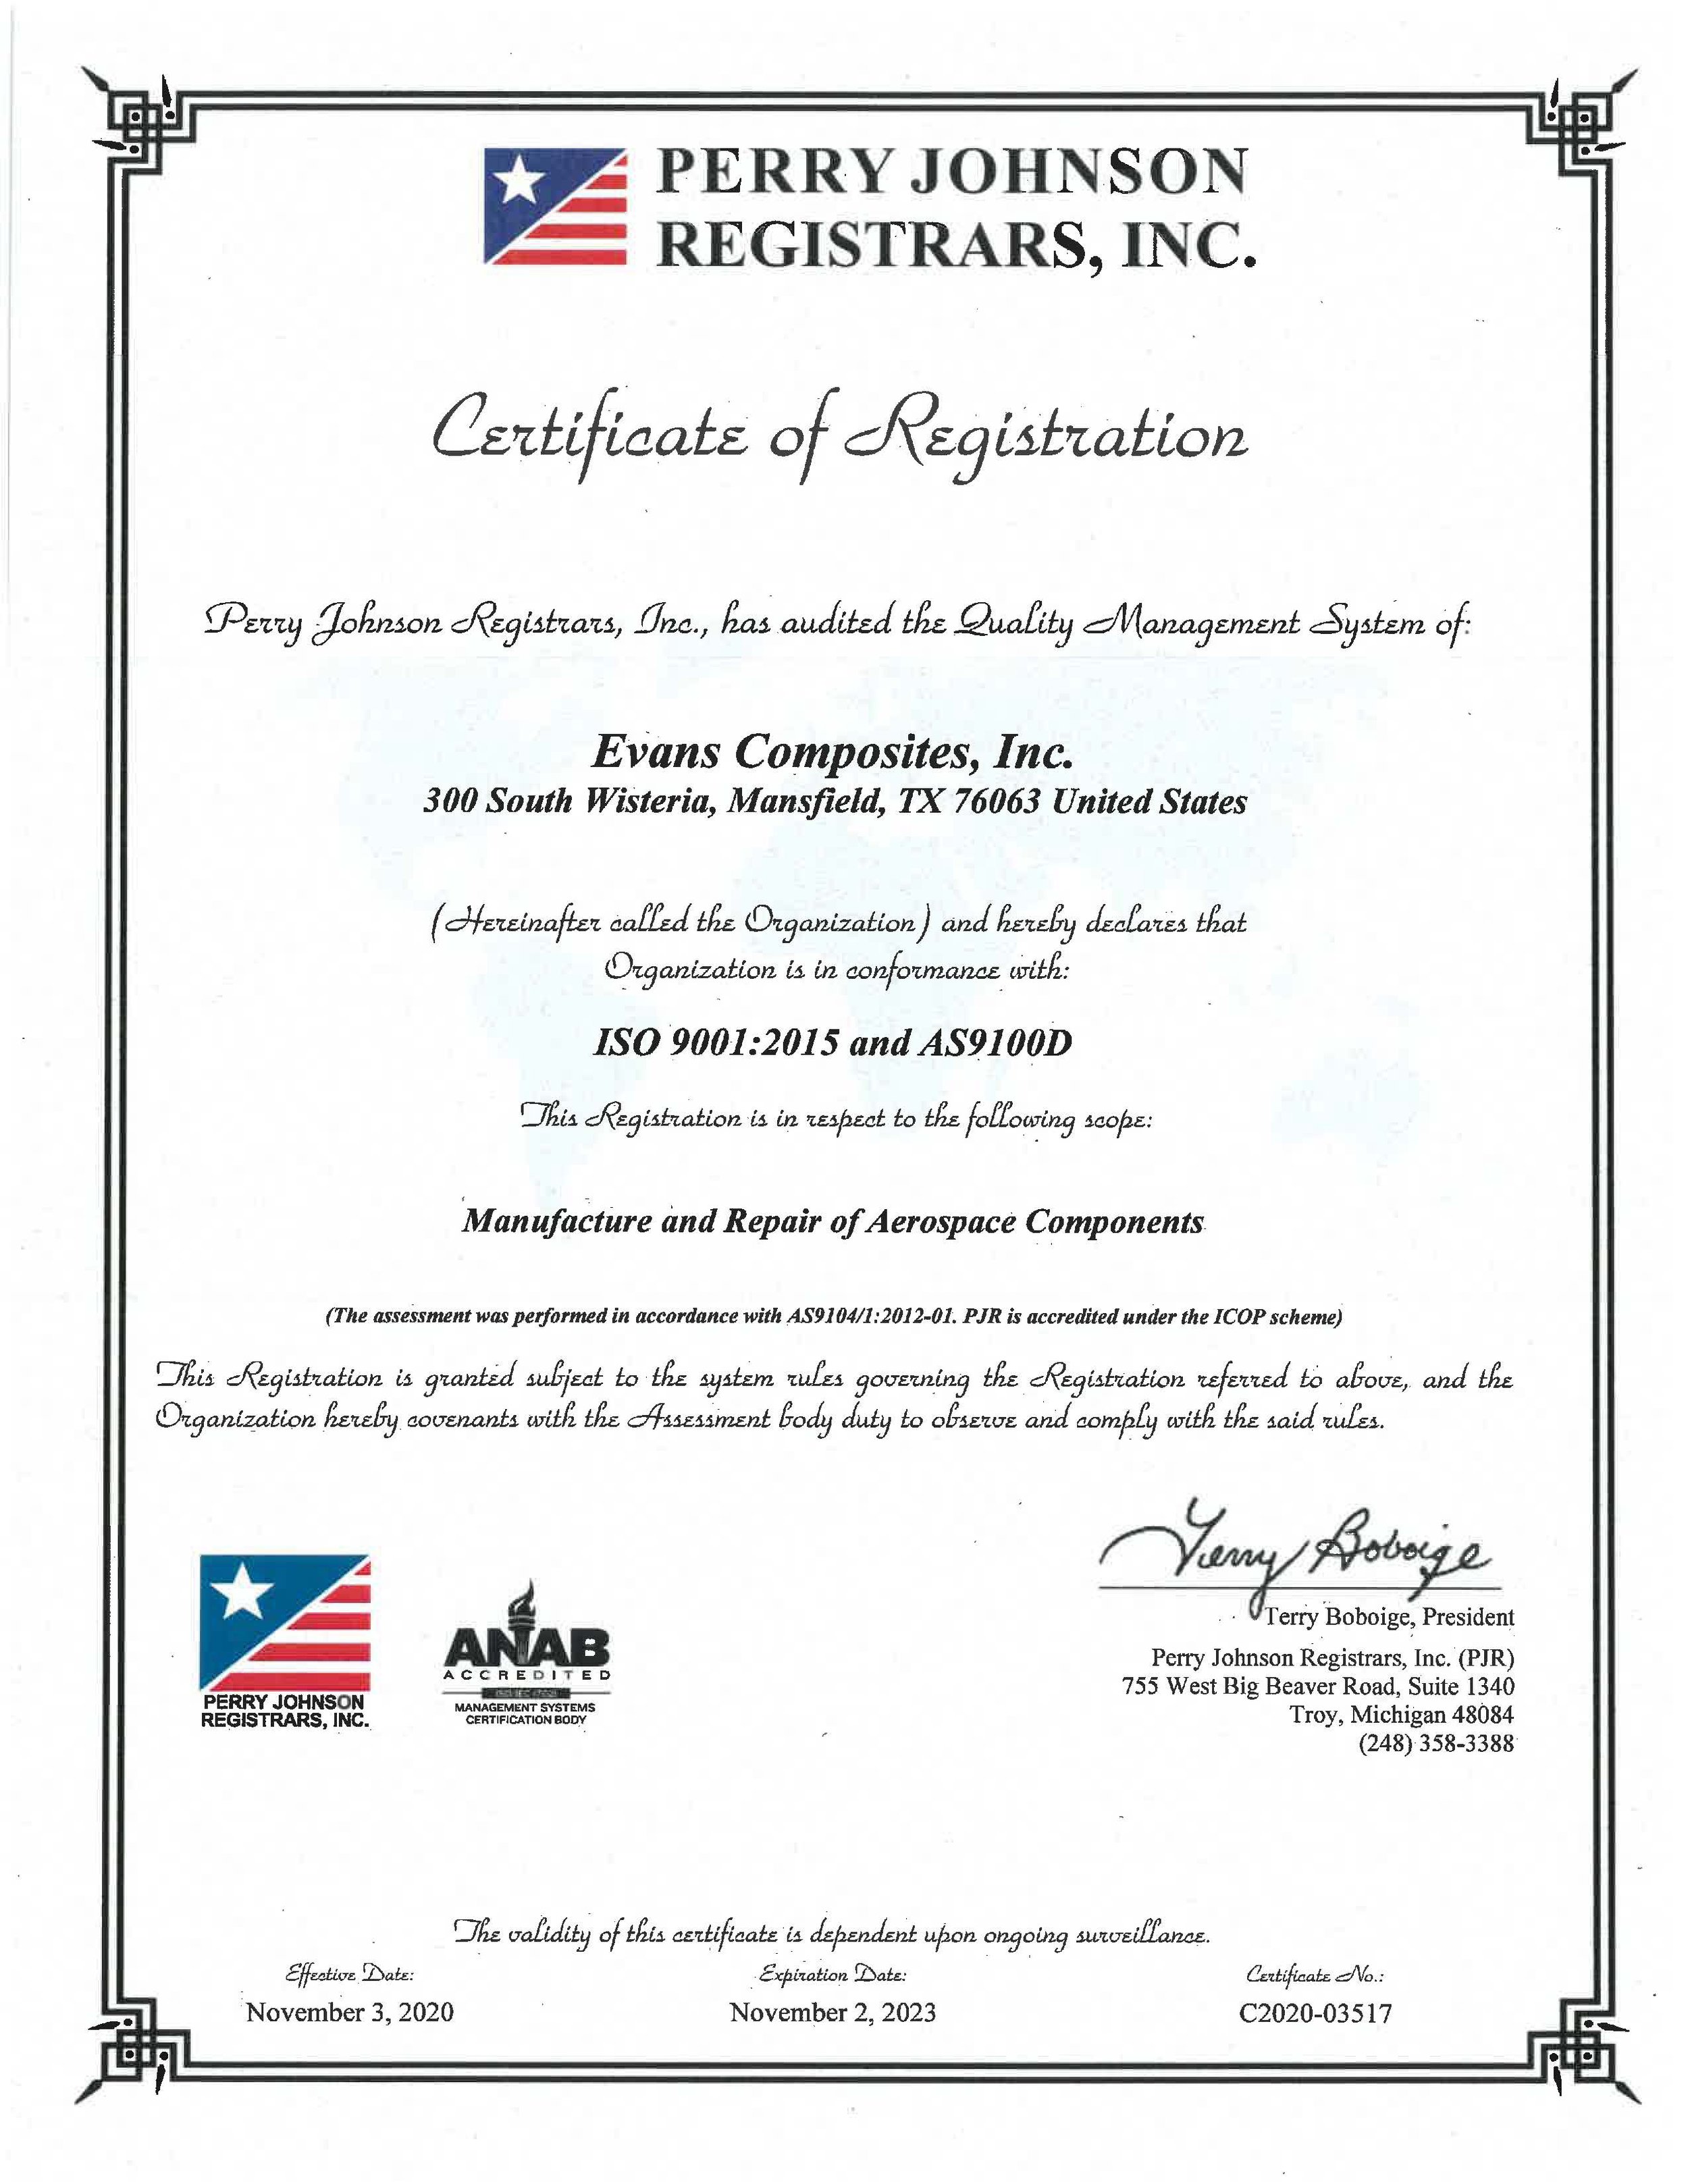 ECI AS9100D Certification